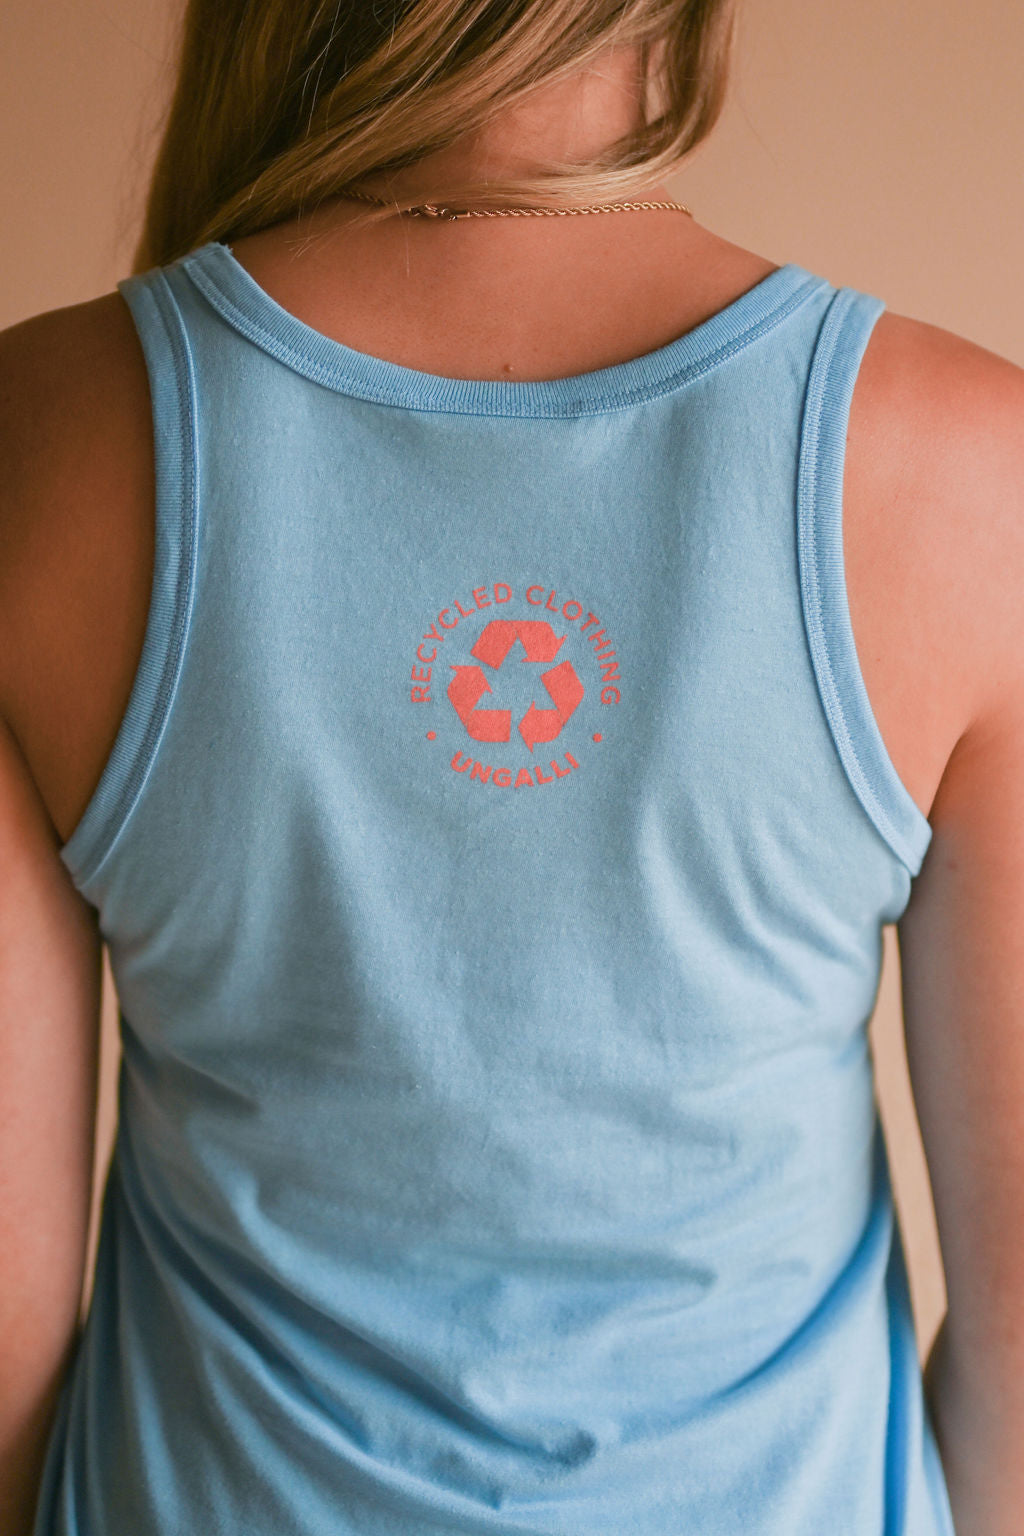 Women's organic blue tank top with pink Ungalli logo on front